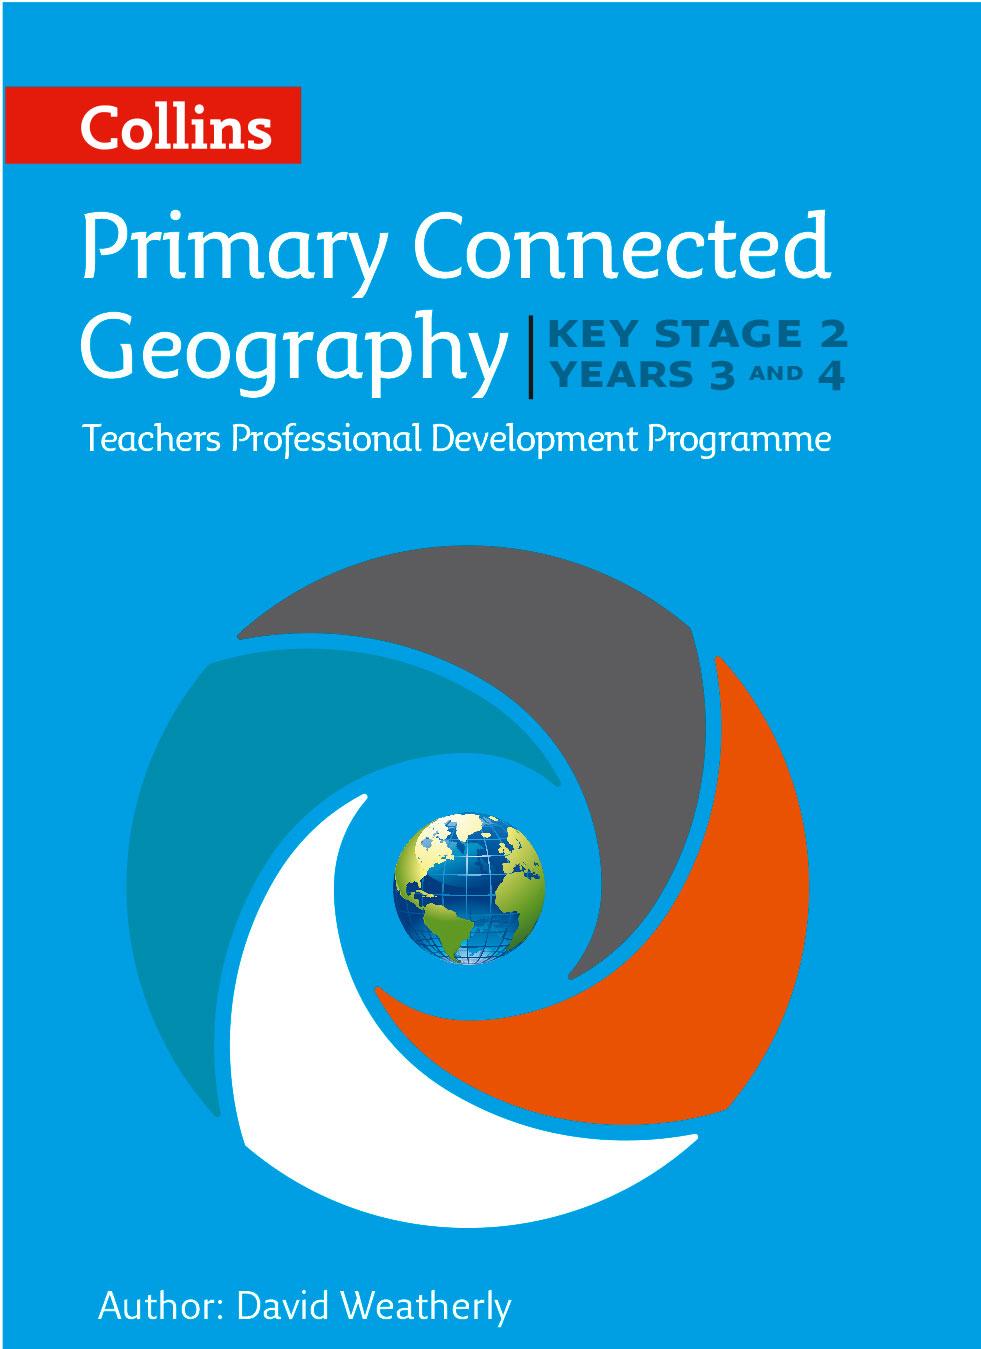 Many pupils in primary education today will live to see the next century and the content and approach to learning adopted in the Connected Geography programme recognises this.